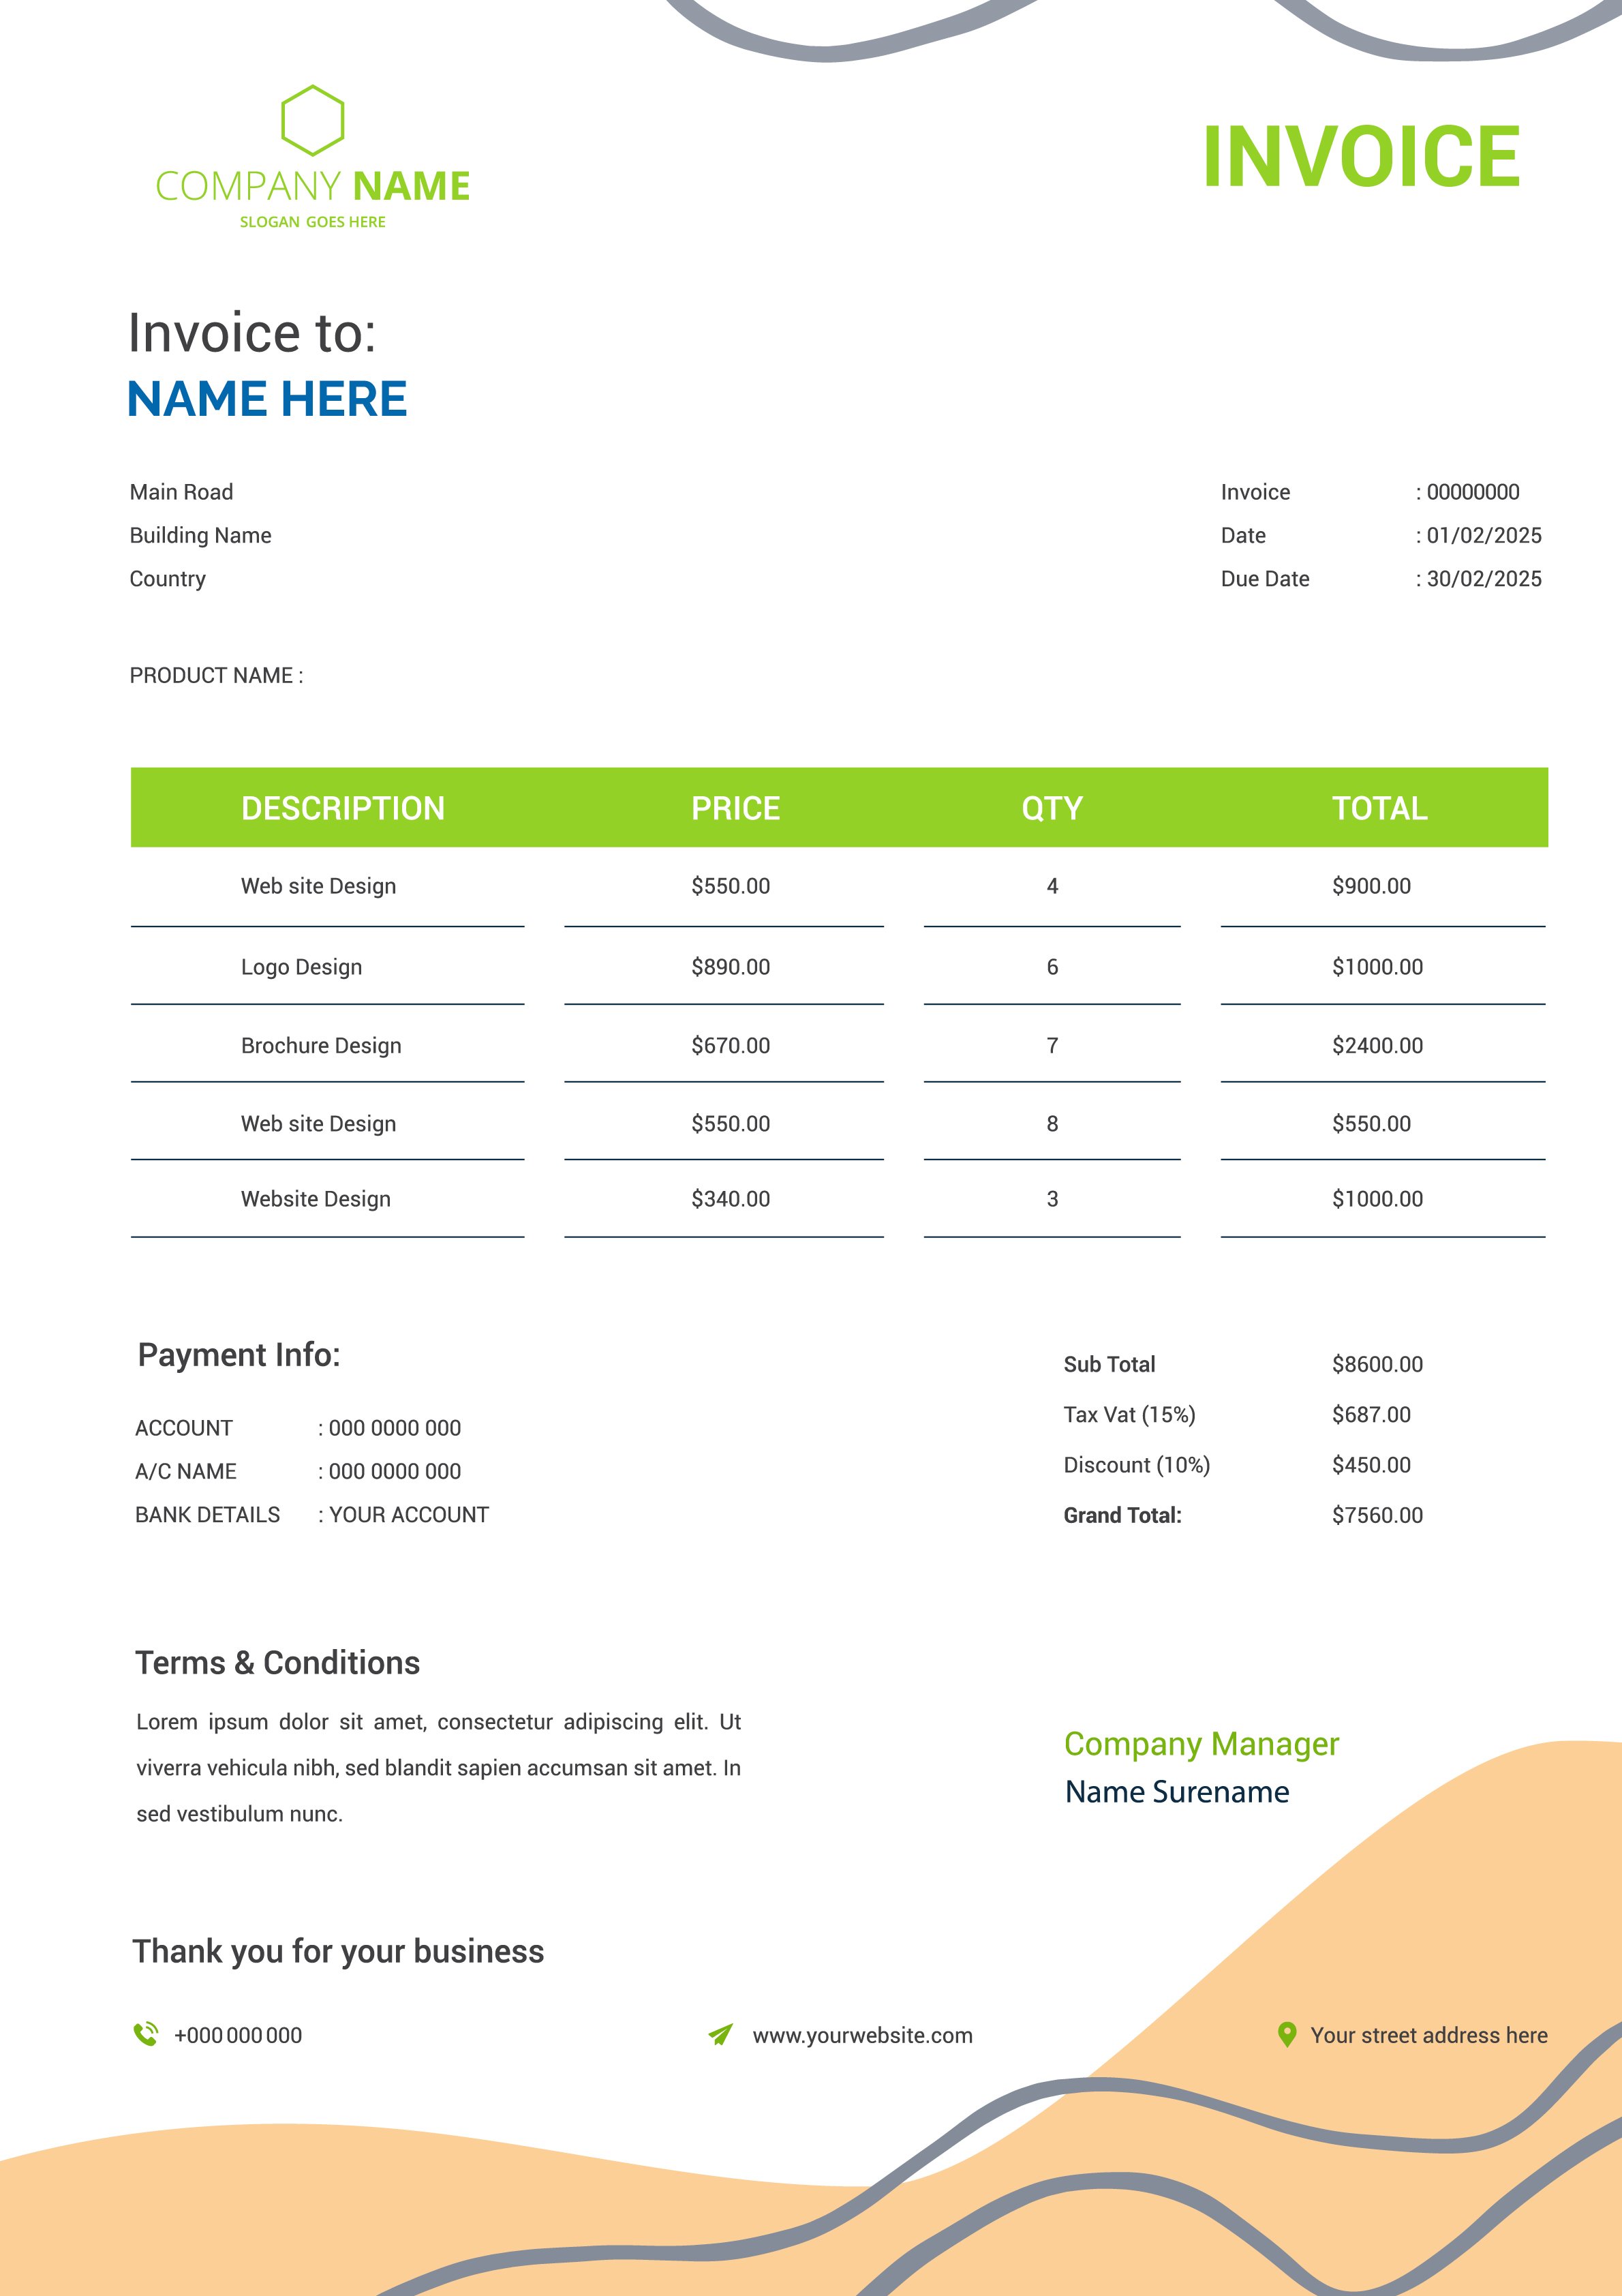 business invoice and letterhead 3 28229 153